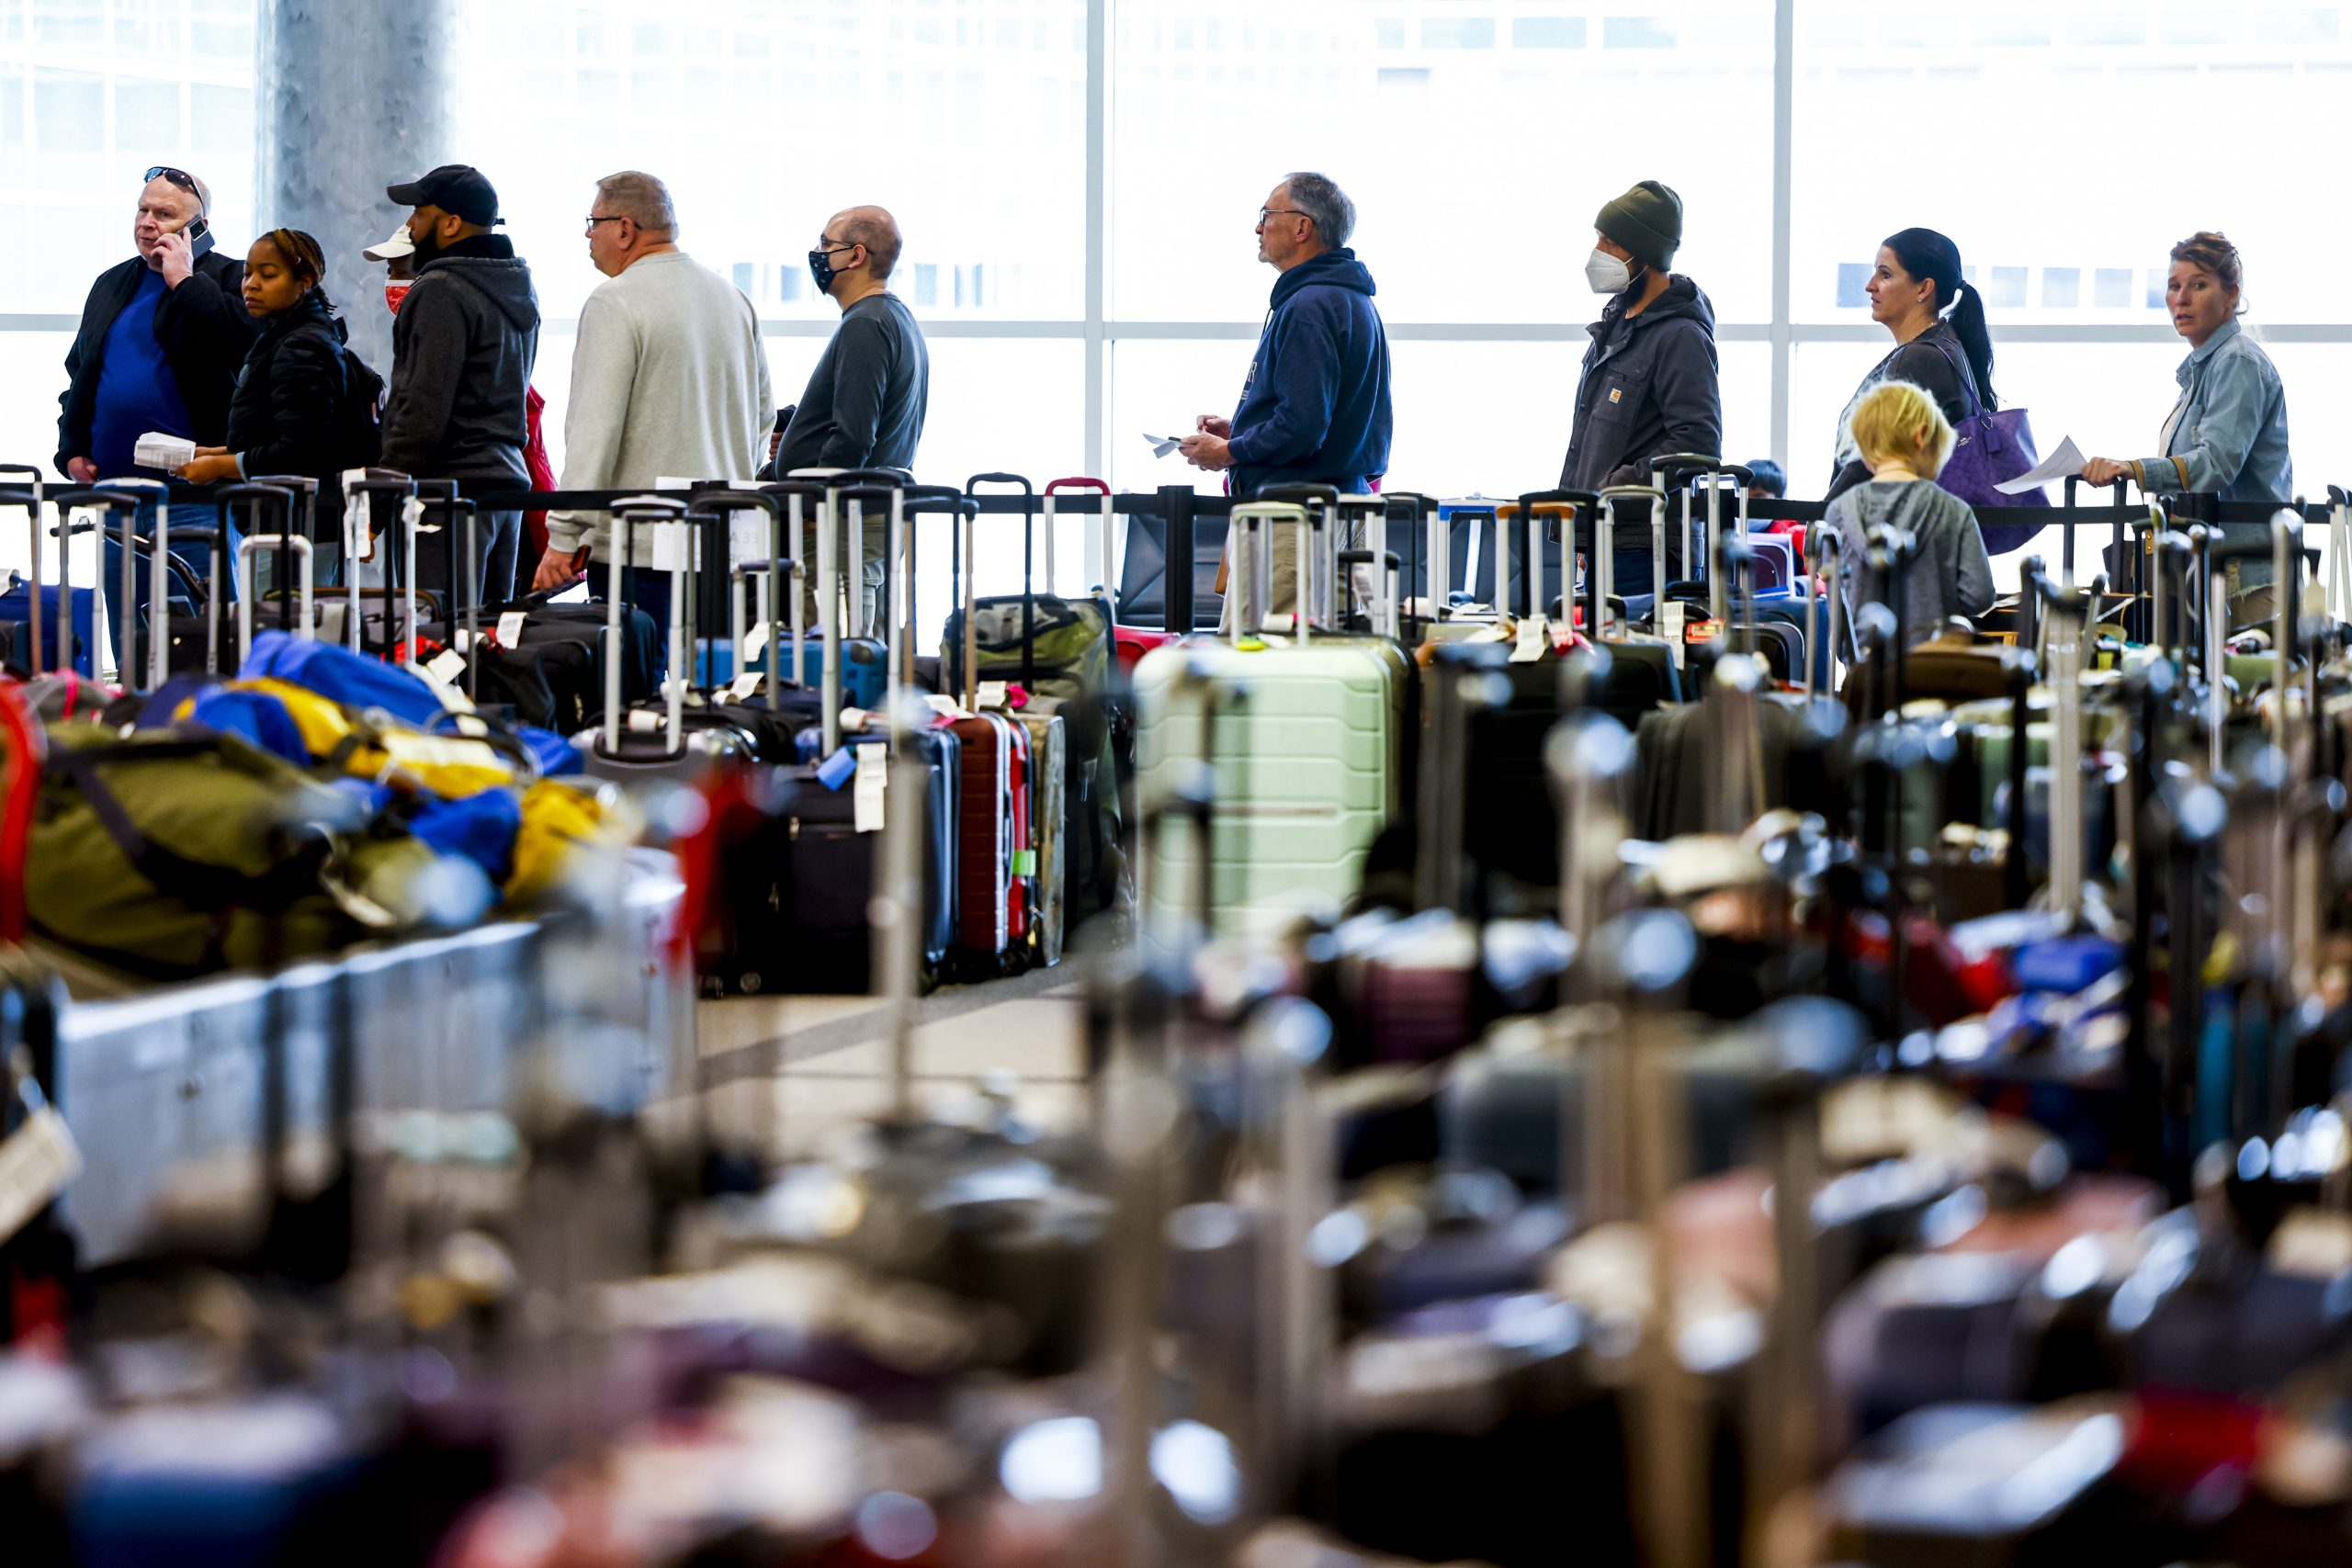 Hundreds of rolling luggage carriers filling an airline terminal, with a line of people in the background.